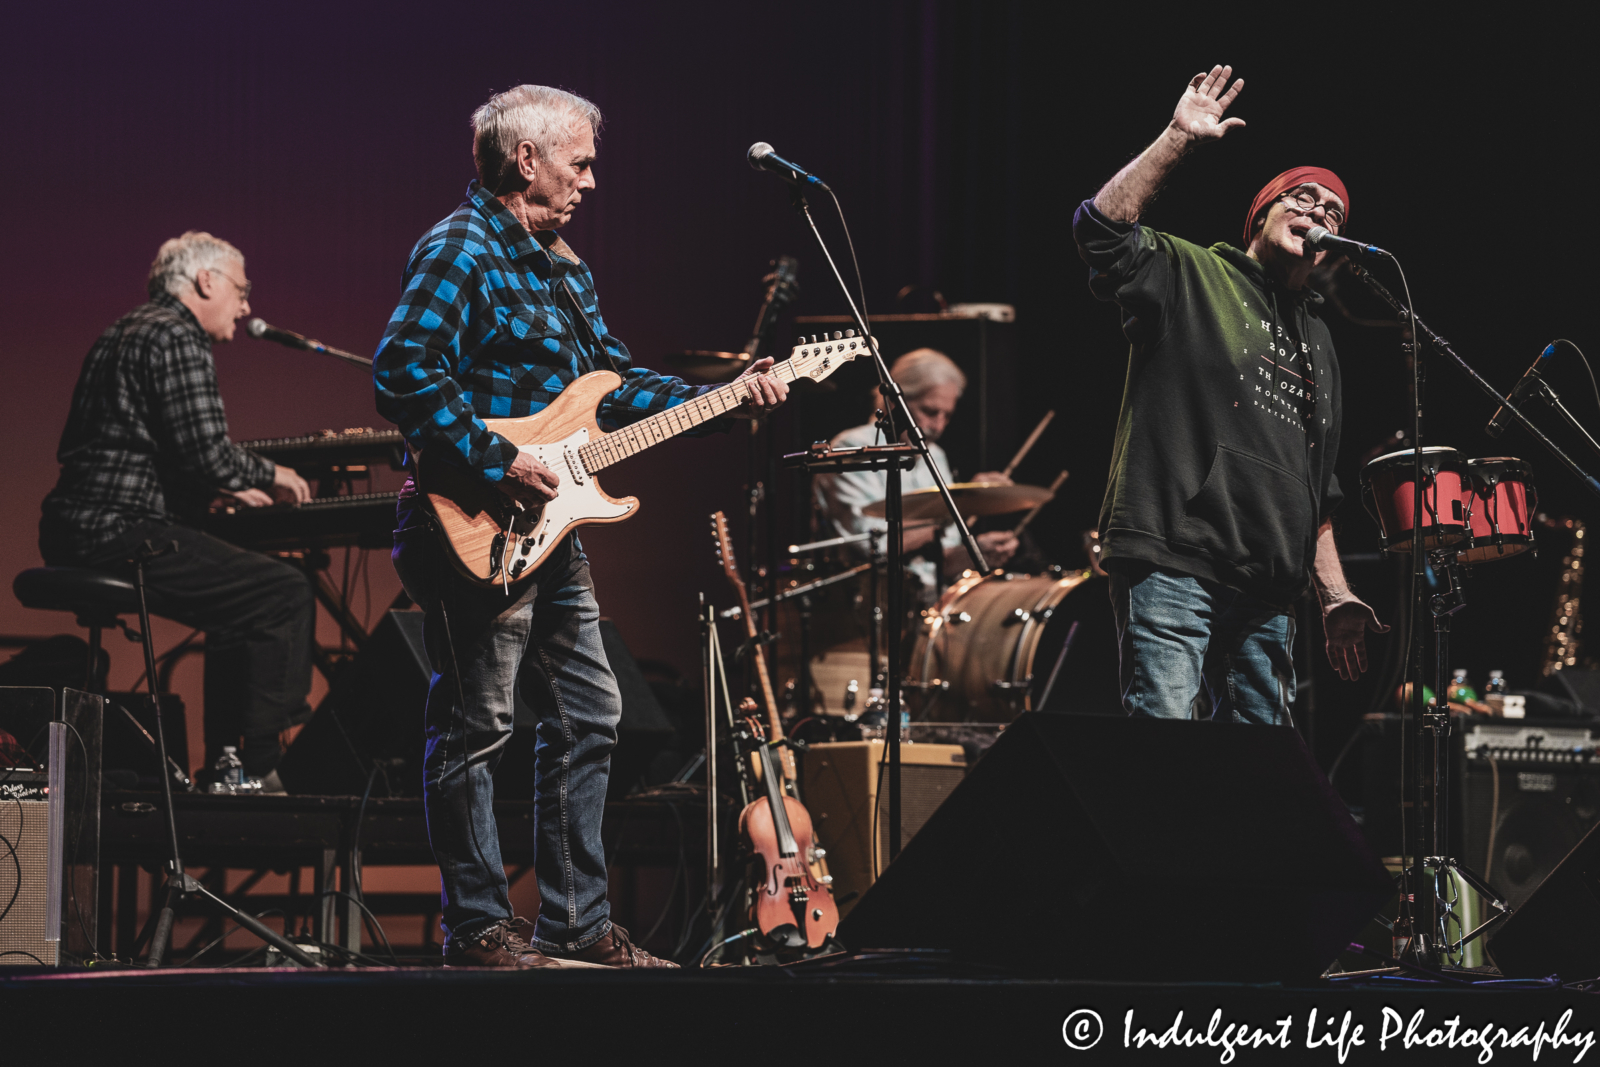 Guitar player Nick Sibley and percussionist Ruell Chappell of The Ozark Mountain Daredevils performing together at Ameristar Casino in Kansas City, MO on November 11, 2023.